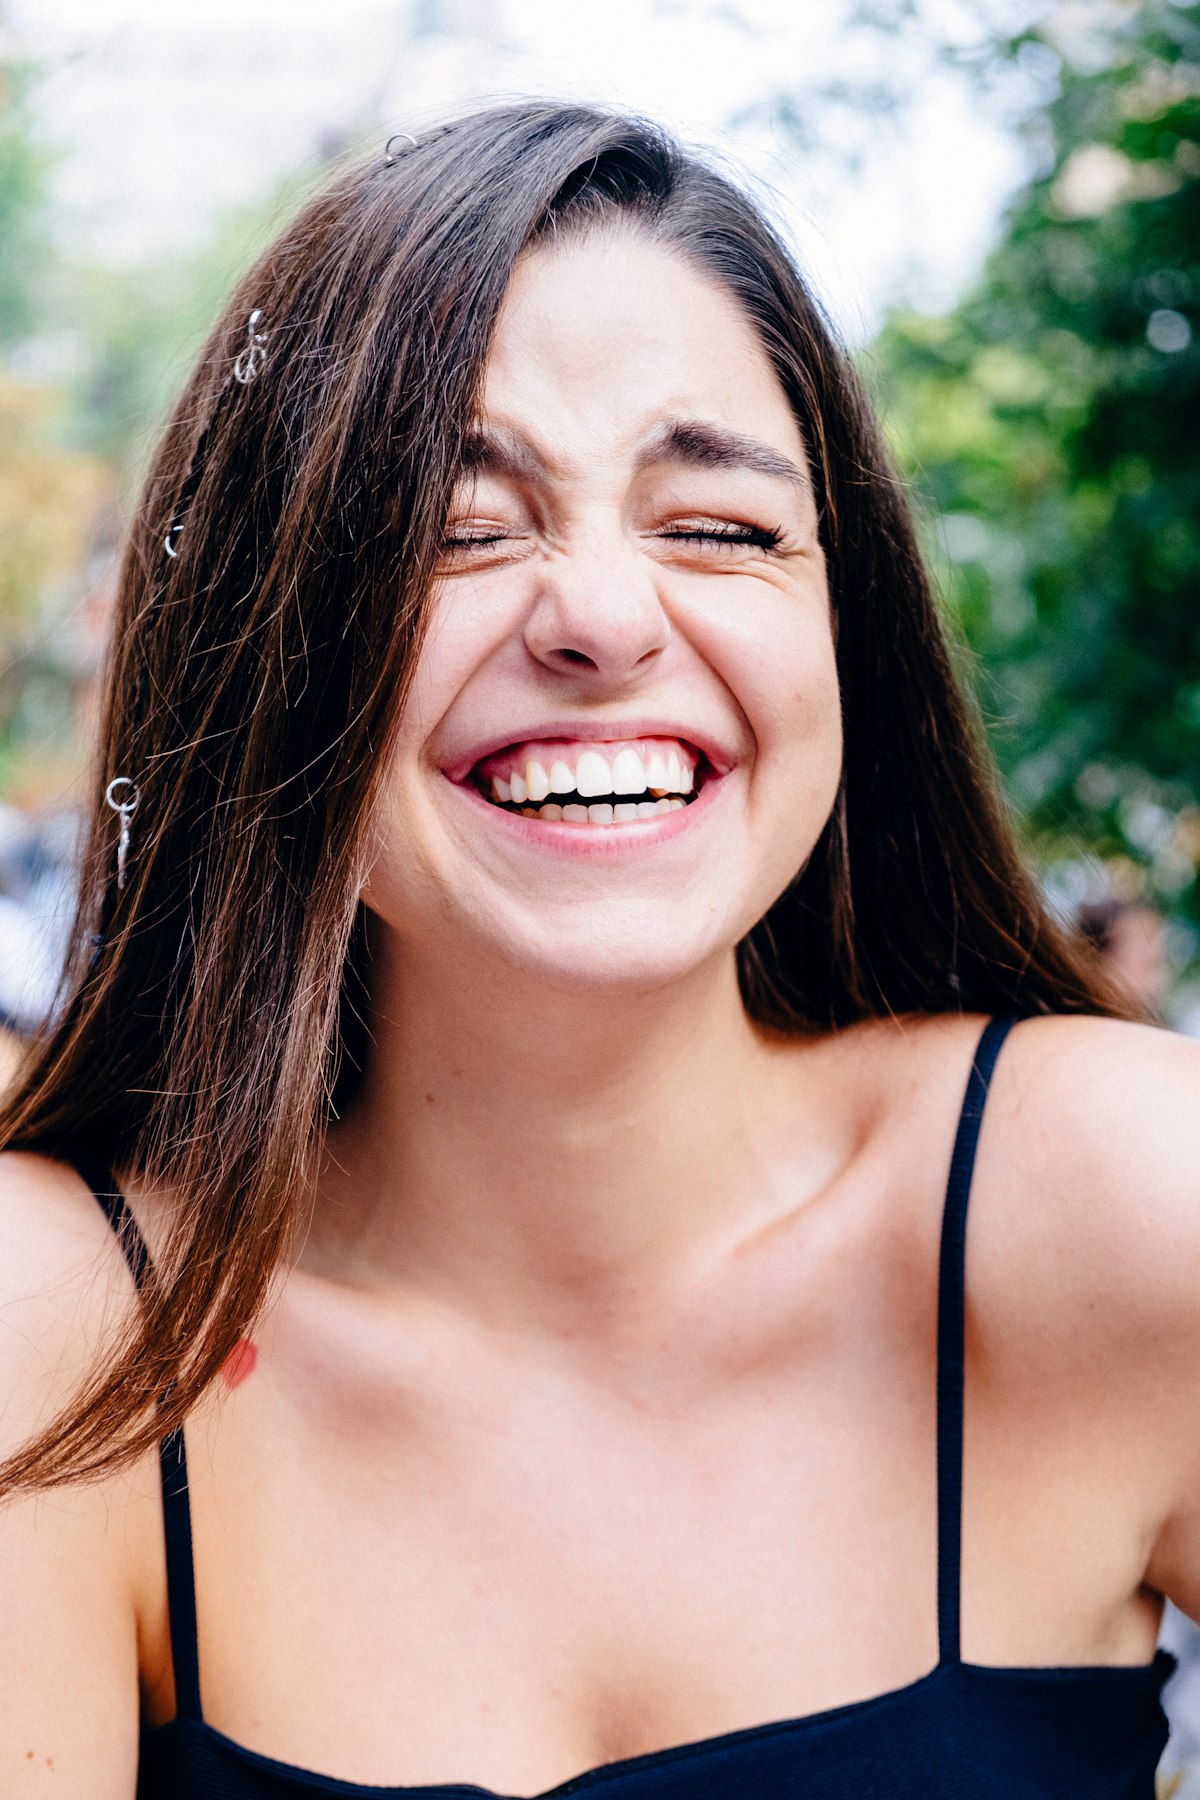 10 Charcoal Toothpastes That Will Give You a Brighter Smile and Help Remove Stains for a Whiter, Healthier Looking Grin!